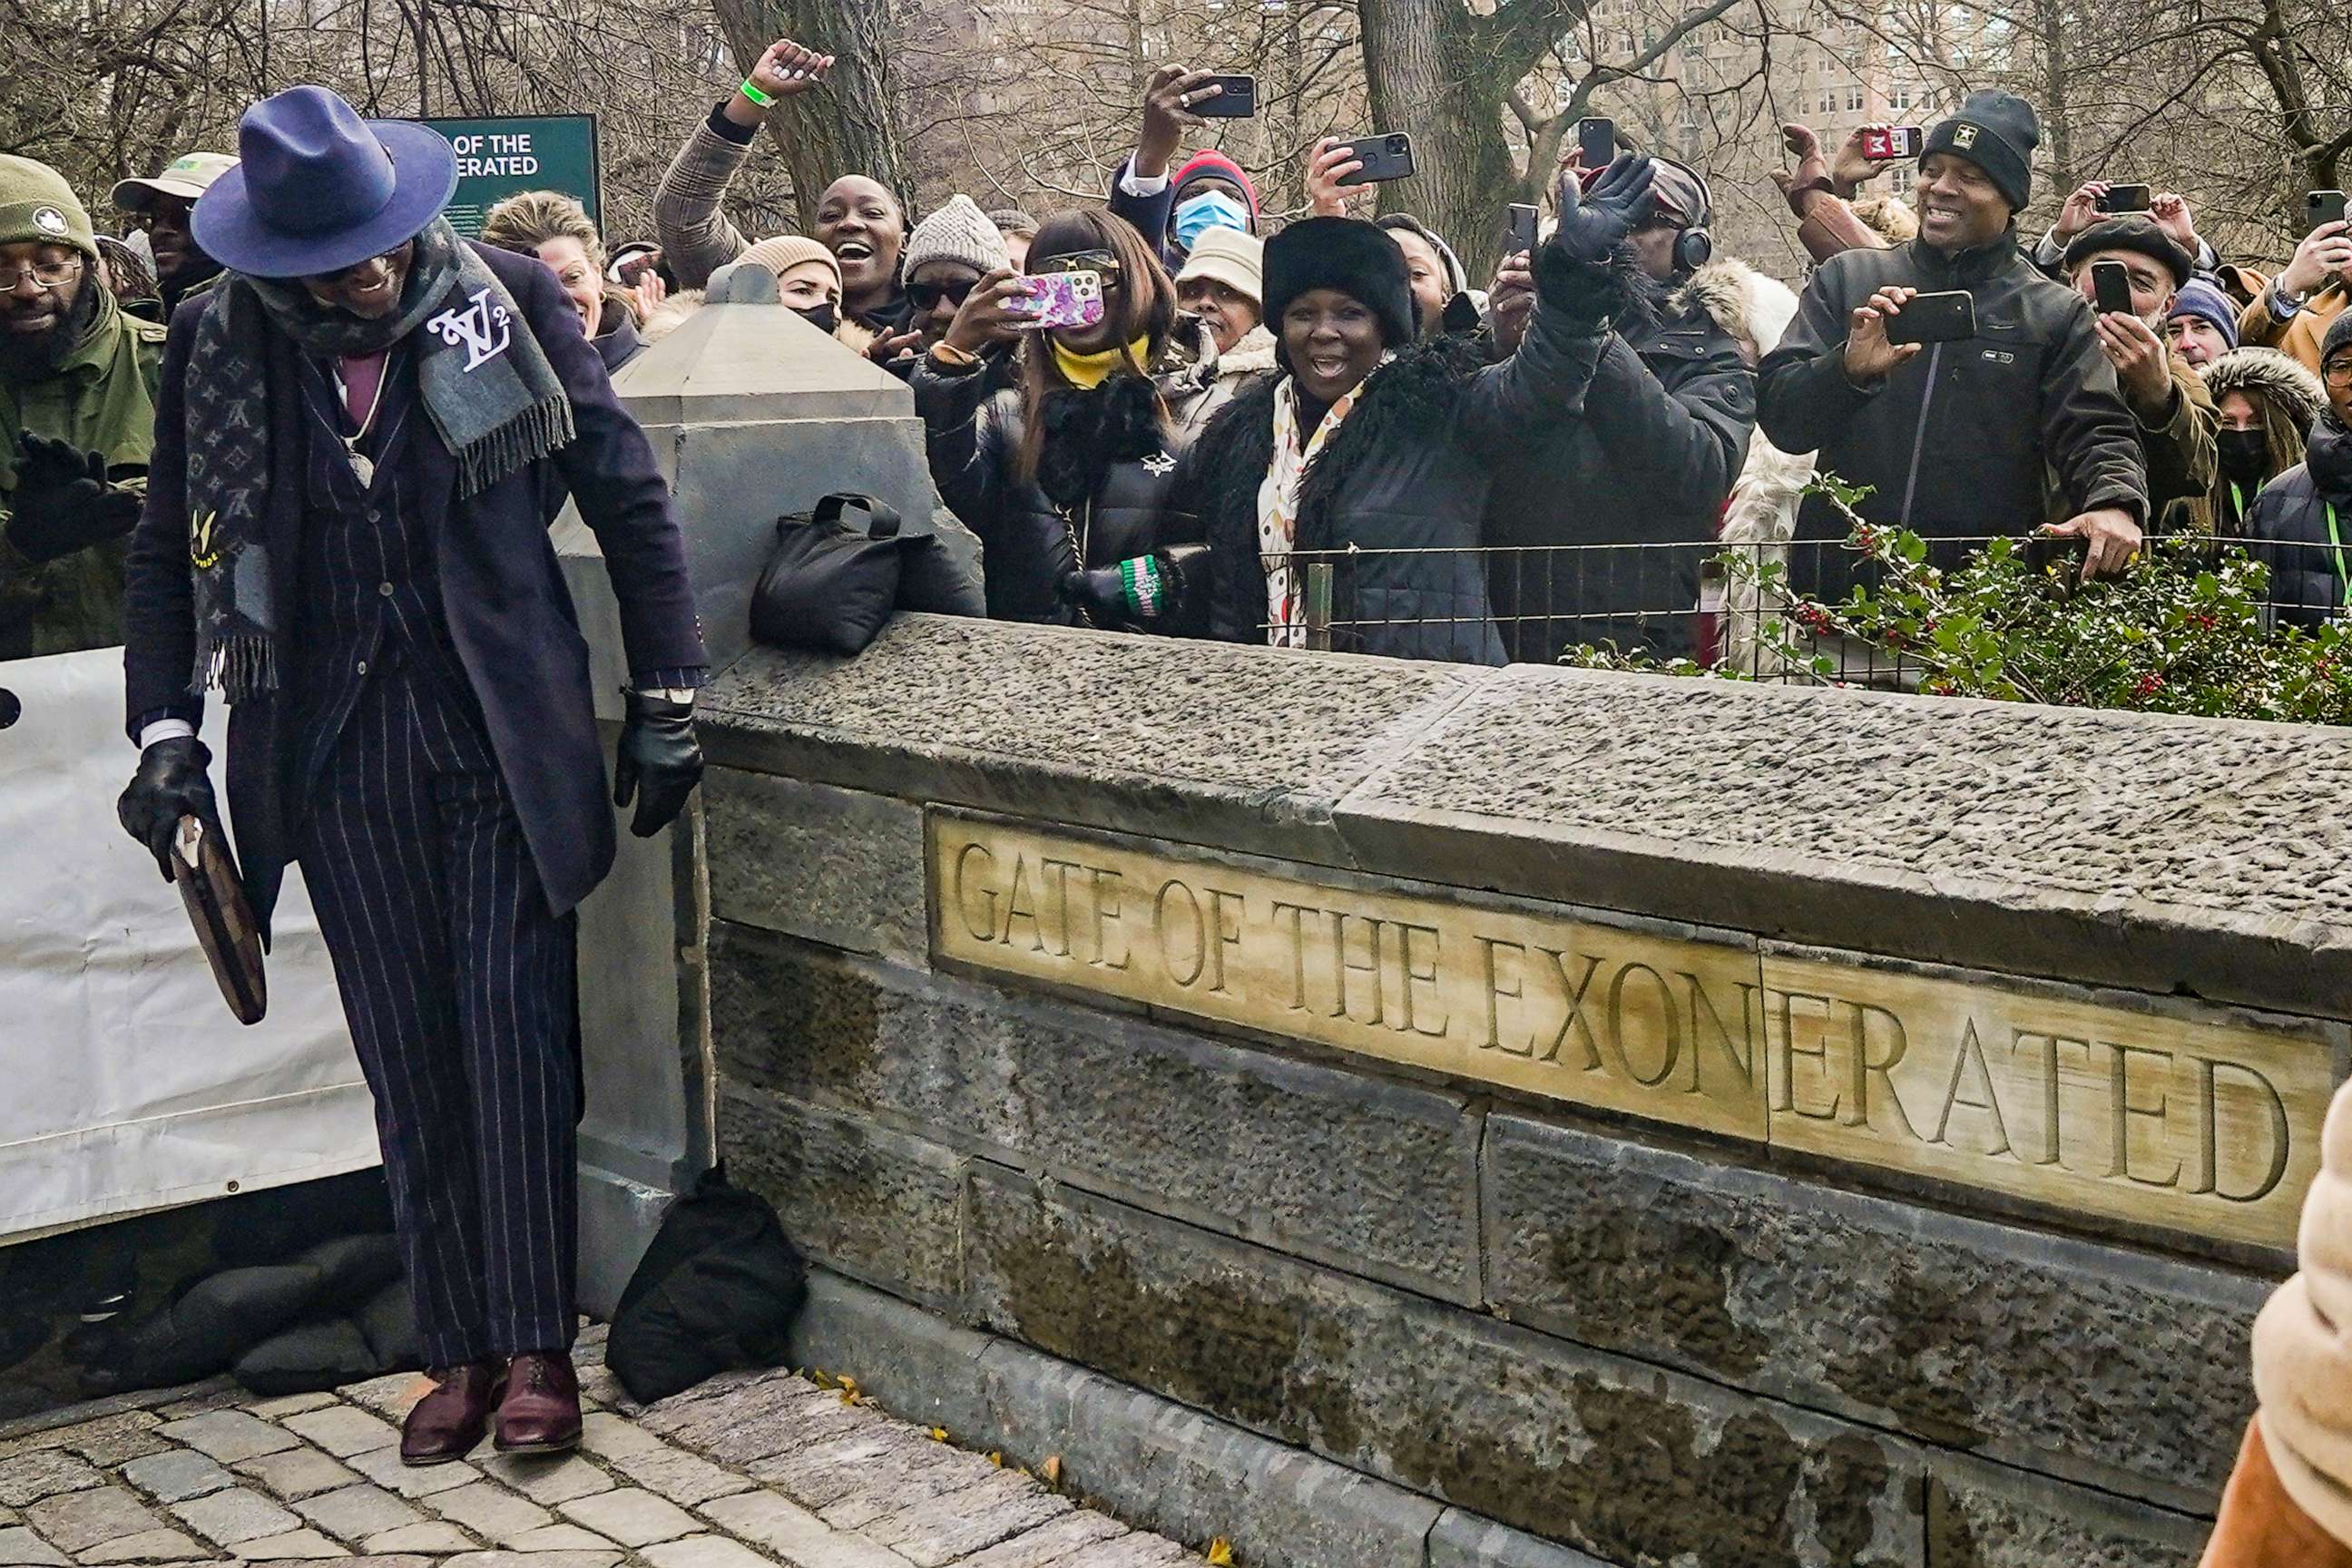 PHOTO: Yusef Salaam, left, one of five men exonerated after being wrongfully convicted for the 1989 rape in Central Park, looks at the plaque "Gate of the Exonerated," unveiled for the northeast gateway of Central Park, Dec. 19, 2022, in New York.